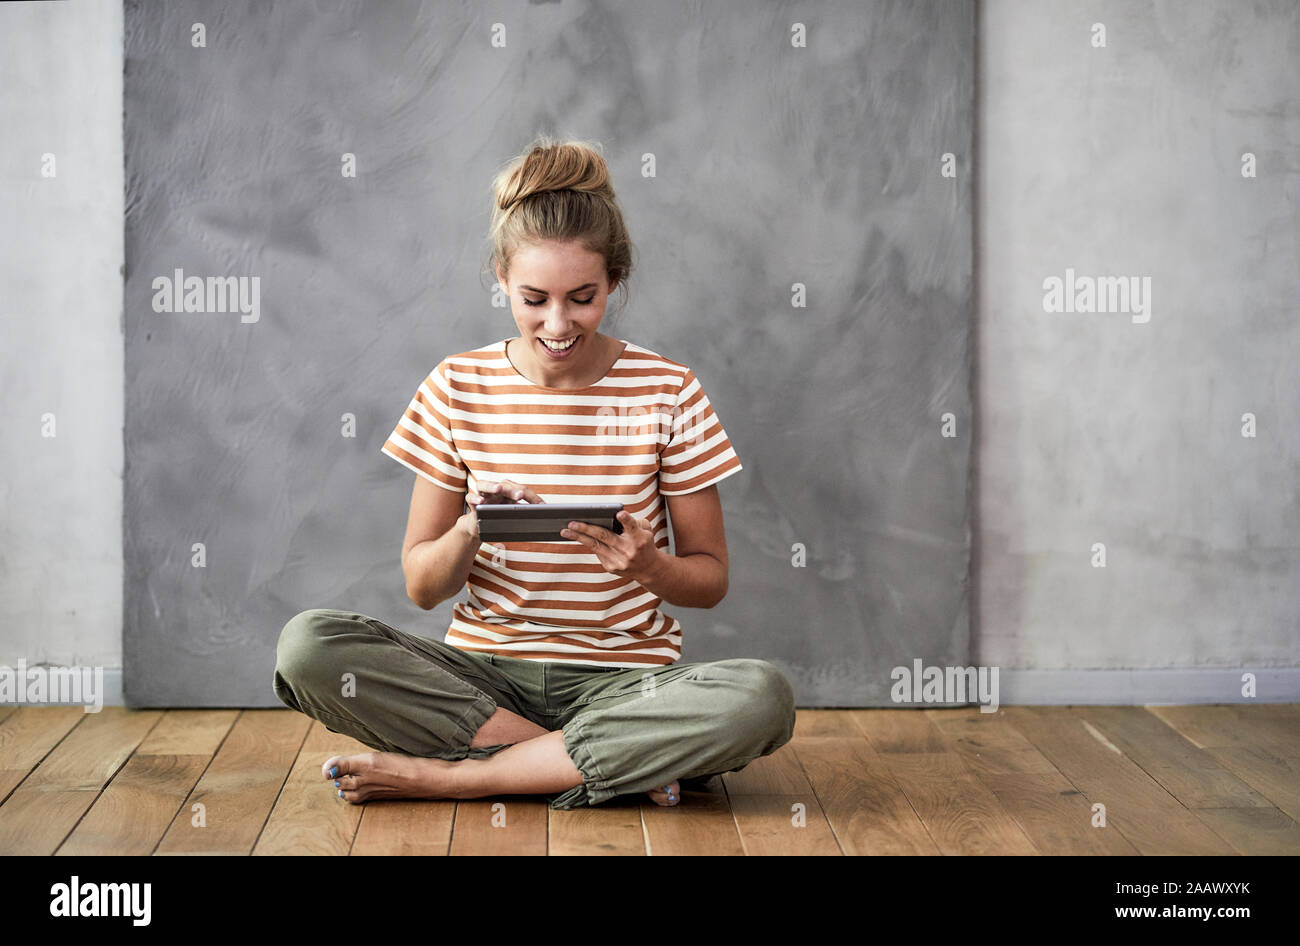 Smiling young woman sitting on the floor using a digital tablet Stock Photo